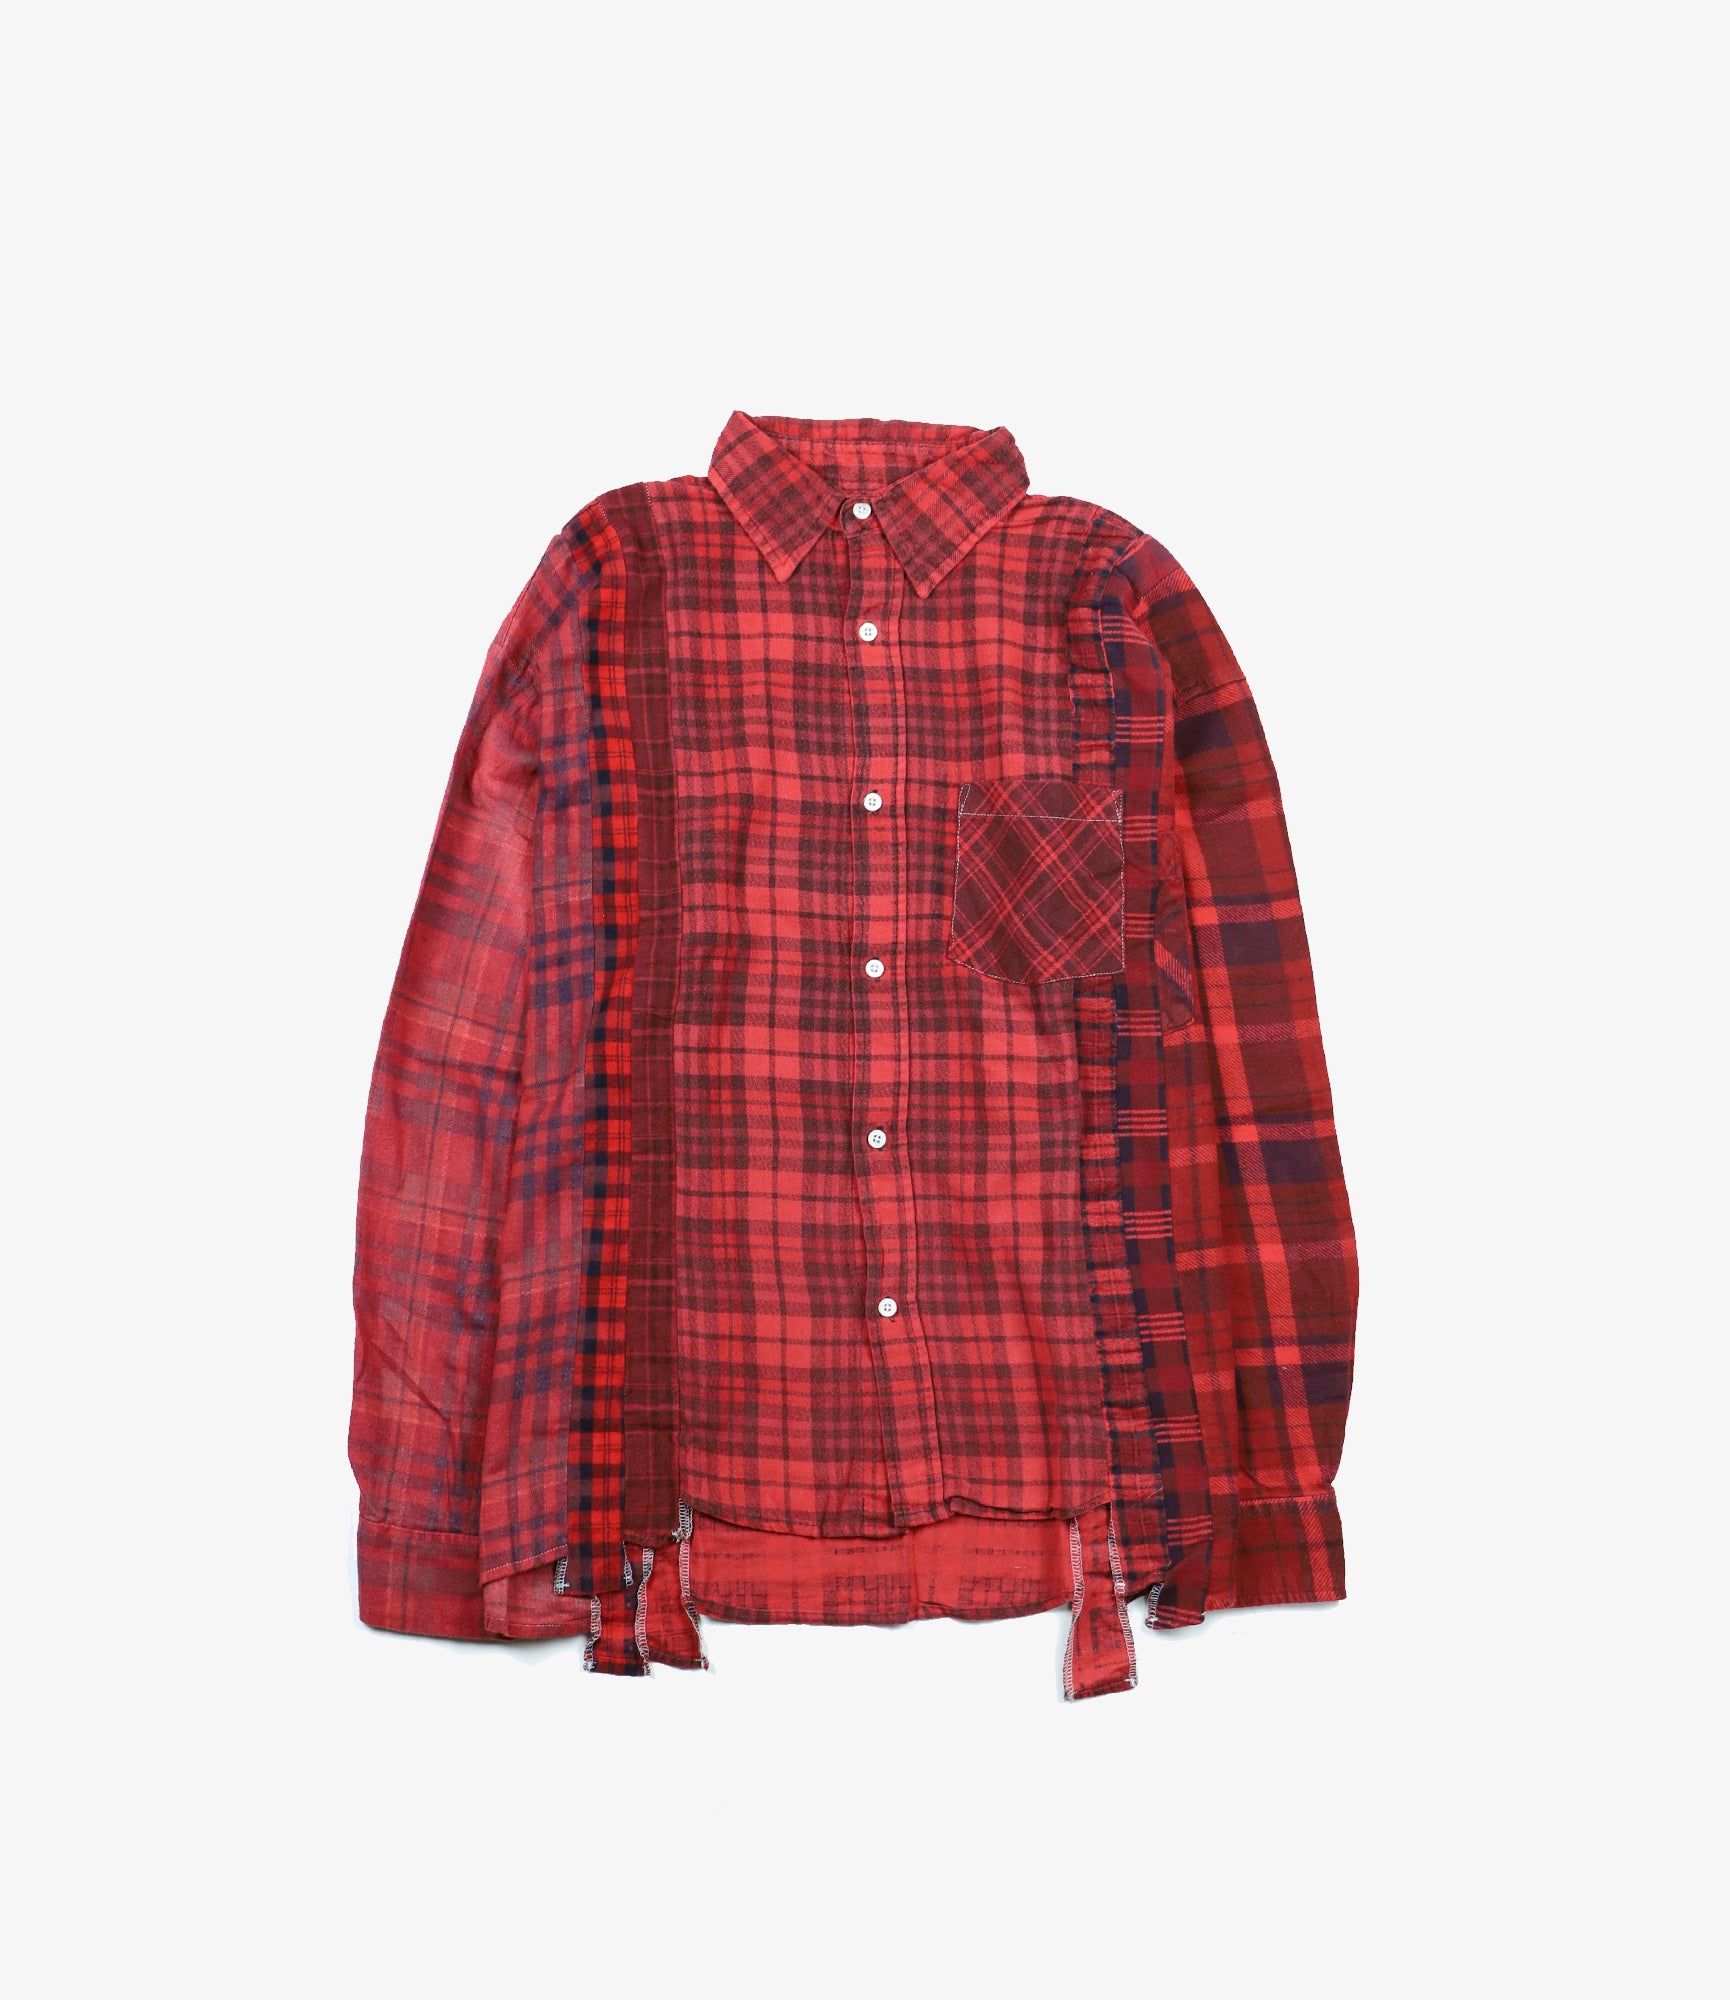 Rebuild by Needles Flannel Shirt - 7 Cuts Wide Shirt / Over Dye - Red